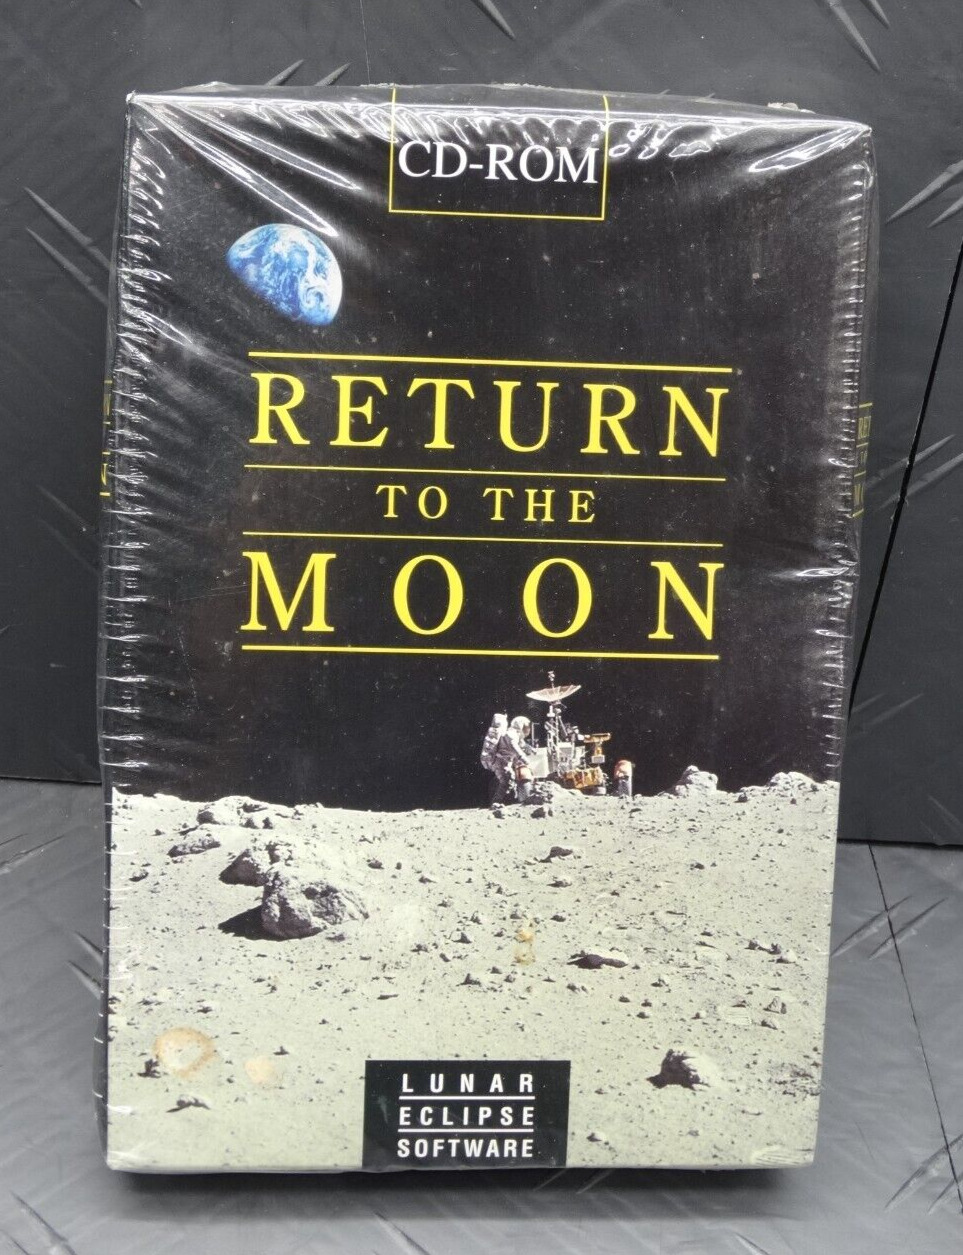 Return To The Moon Lunar Eclipse Software CD Rom 1994 Factory Sealed New Vintage